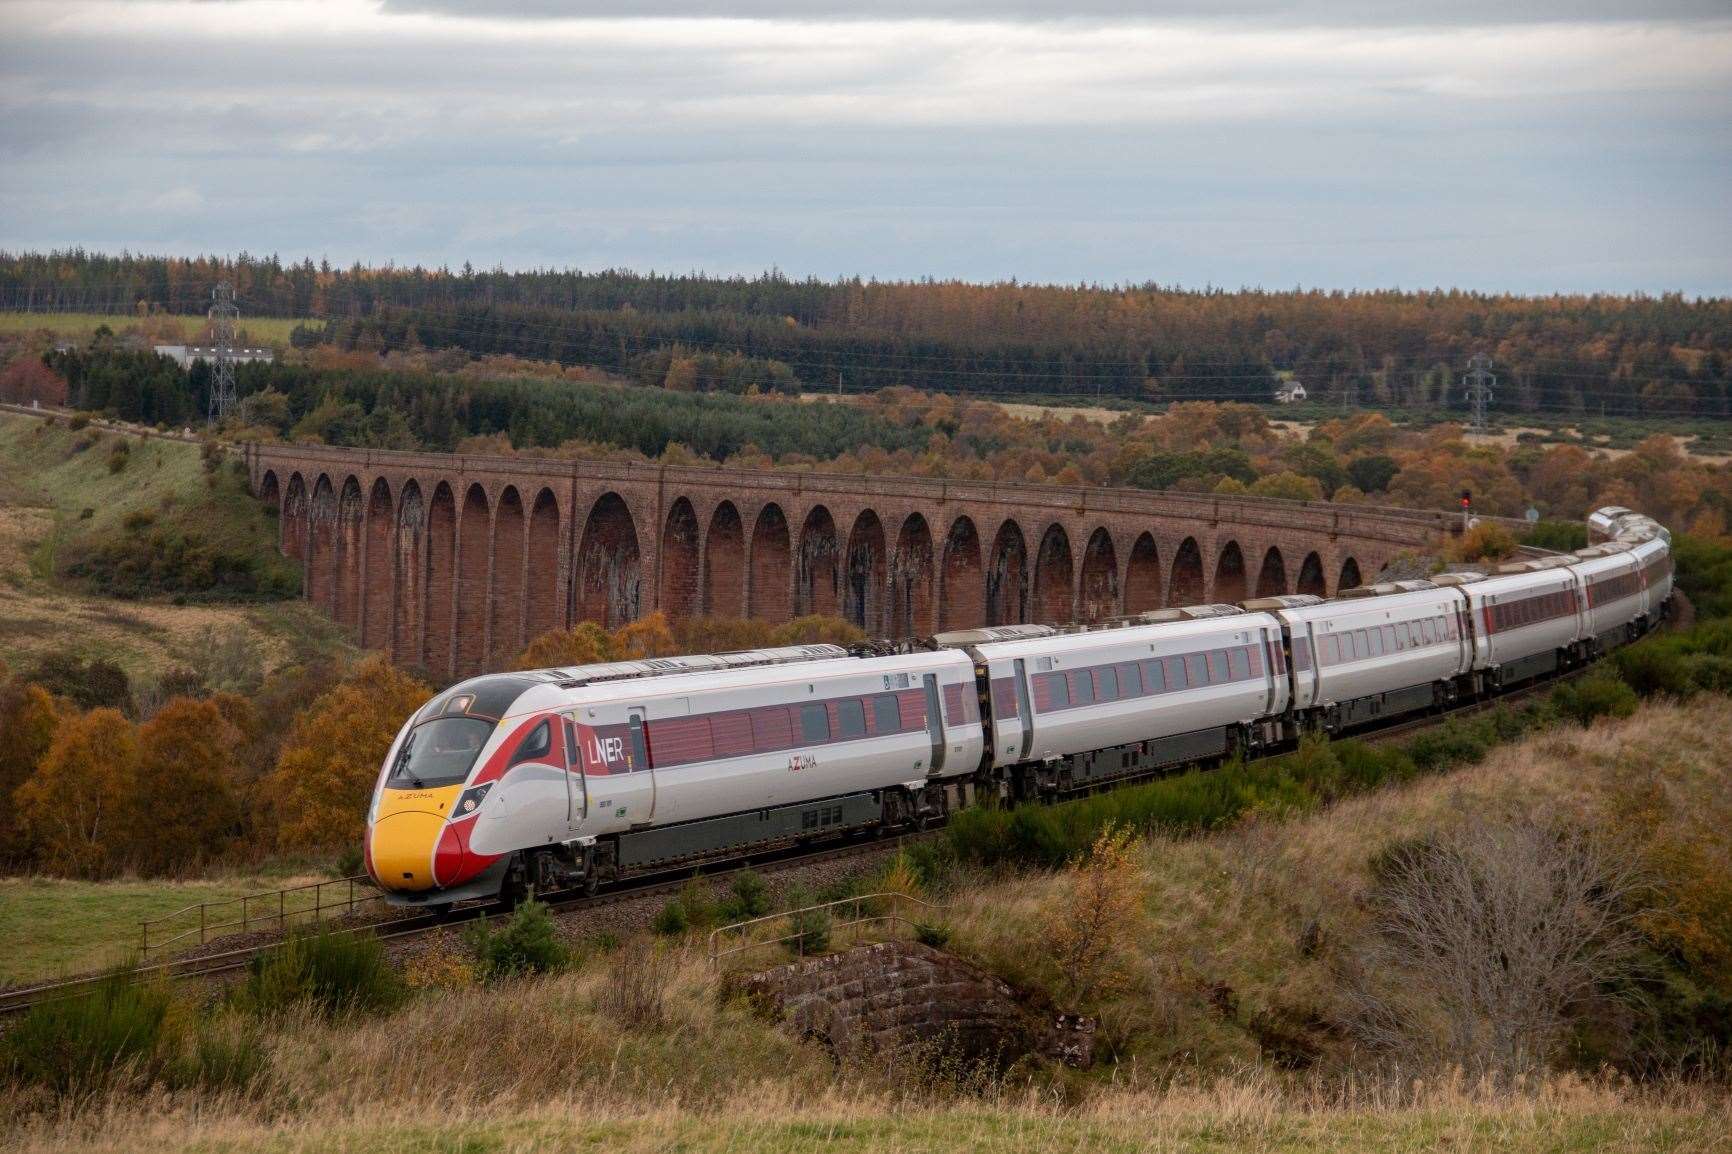 The new Azuma trains were recently introduced on the daily route between the Highlands and London.